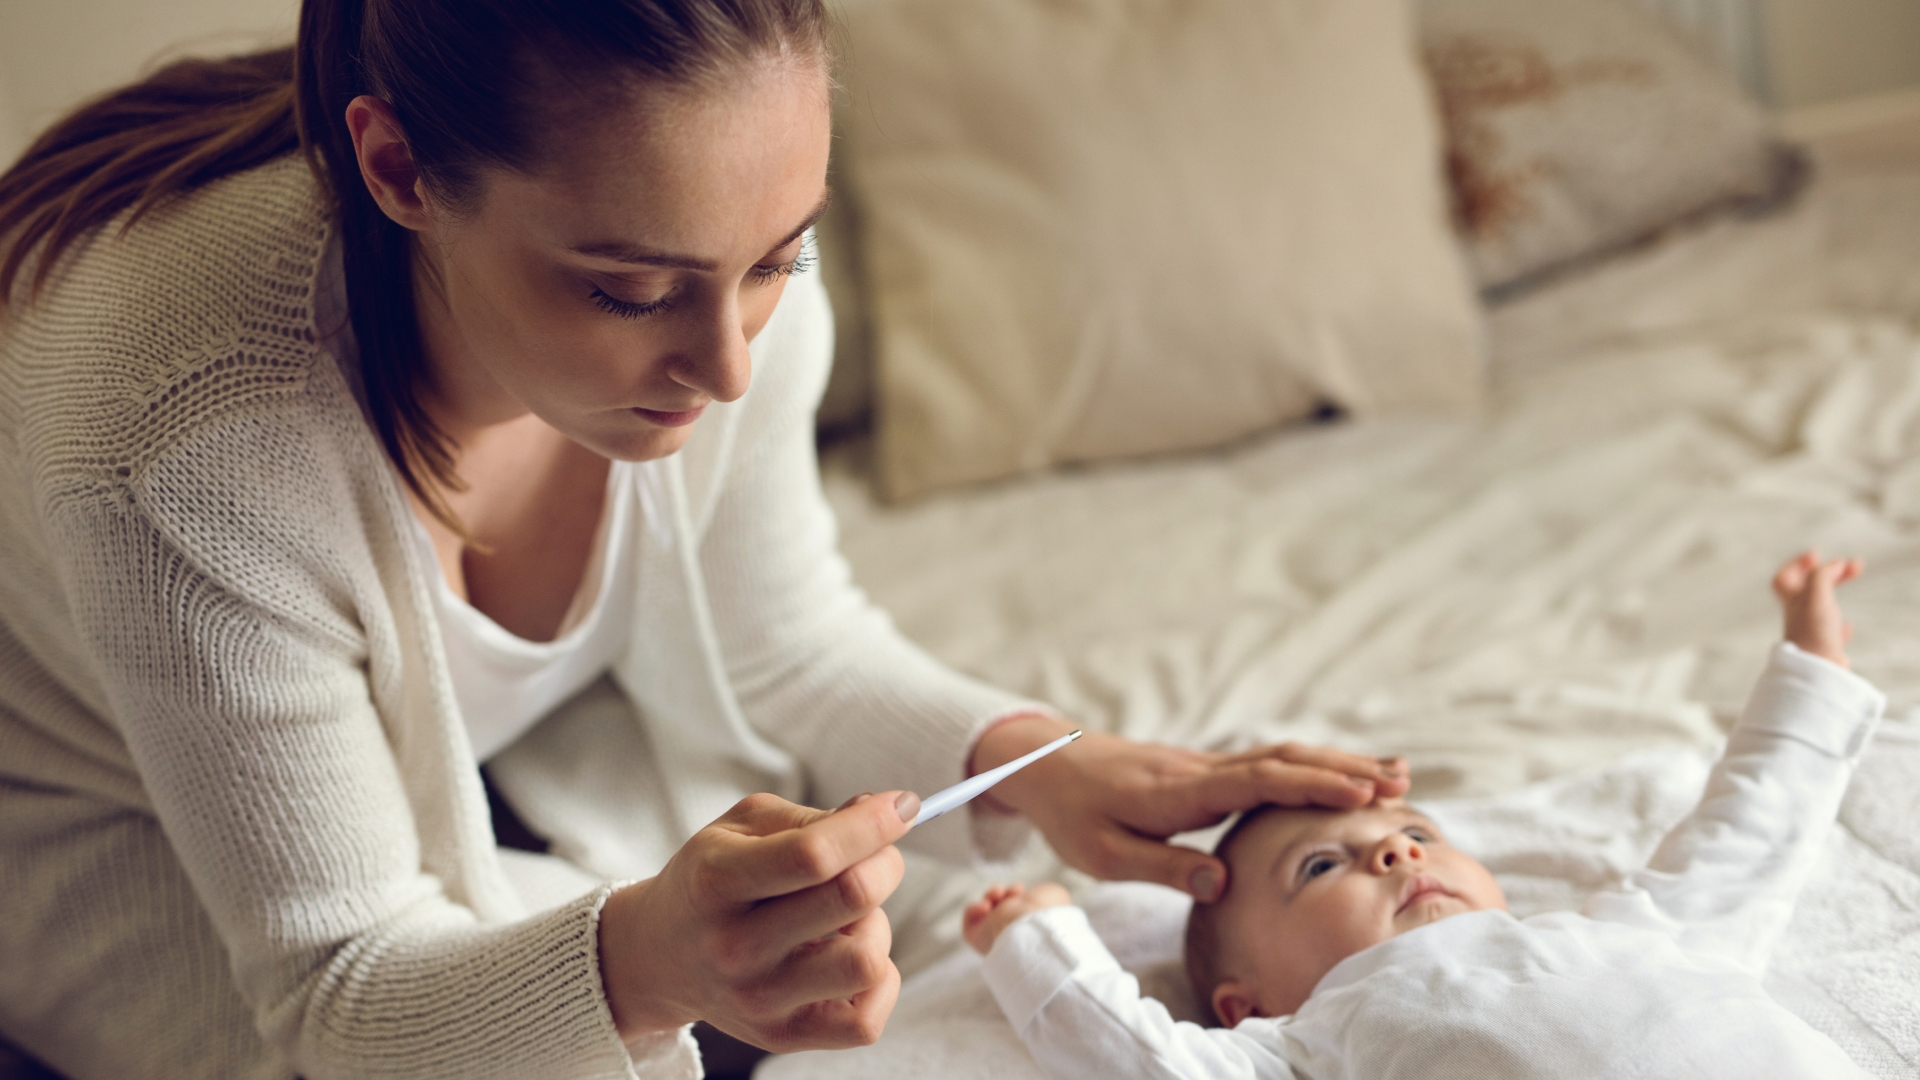 RSV is a virus that most every child has had at some point in their lives before the age of two. For most, the symptoms clear up in a week or two, but for others – particularly for infants under six months of age, the virus can pose a serious threat. 